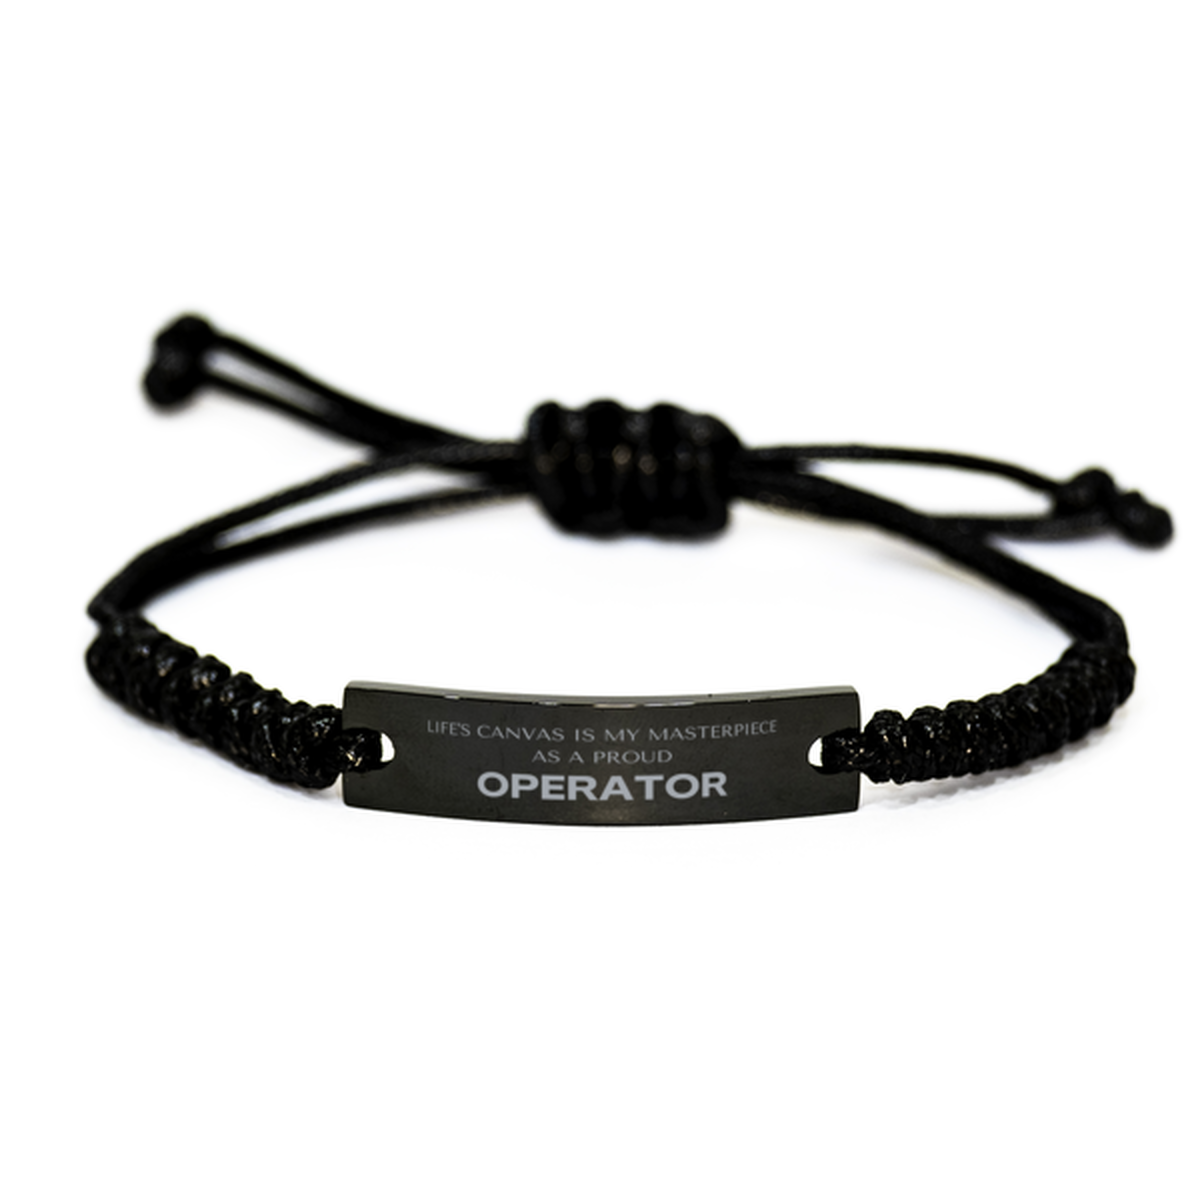 Proud Operator Gifts, Life's canvas is my masterpiece, Epic Birthday Christmas Unique Black Rope Bracelet For Operator, Coworkers, Men, Women, Friends